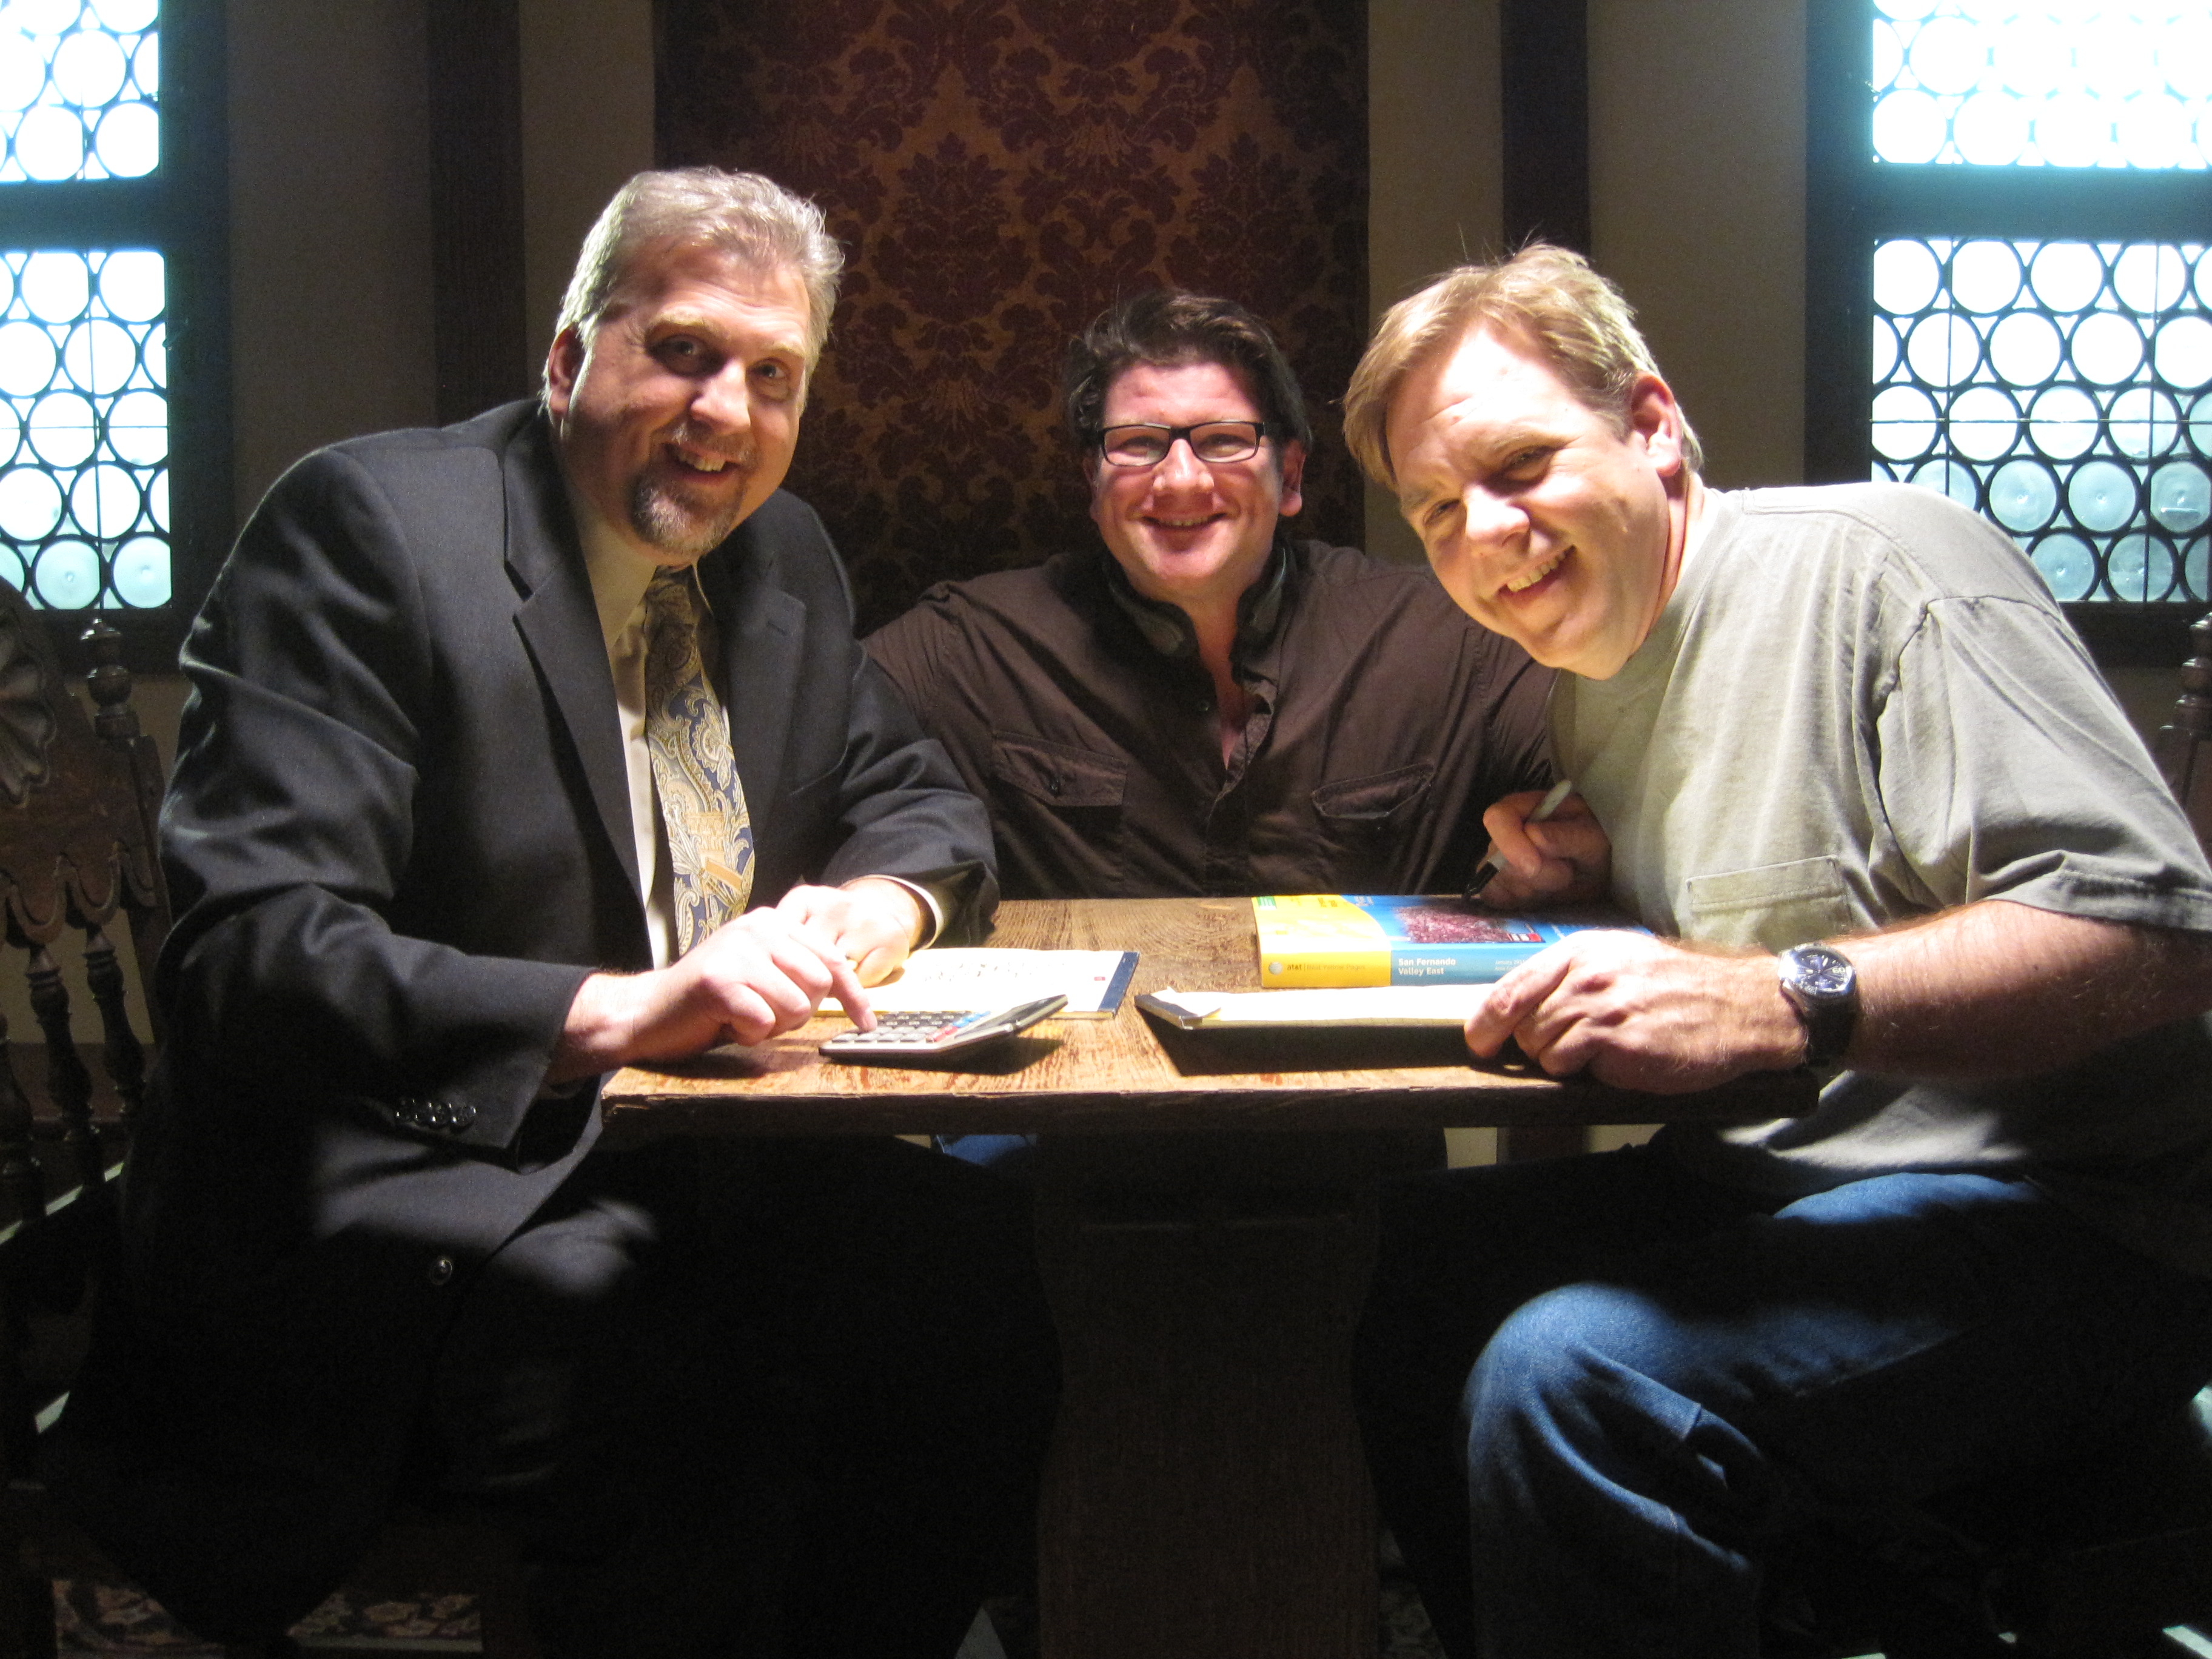 Director JUDE GERARD PREST with the stars of WE CAN GET THEM FOR YOU WHOLESALE based on a short story by NEIL GAIMAN. (L to R) DANIEL ROEBUCK (Burton Kimble), JUDE GERARD PREST (Director) and BRIAN HOWE (Peter Pinter)